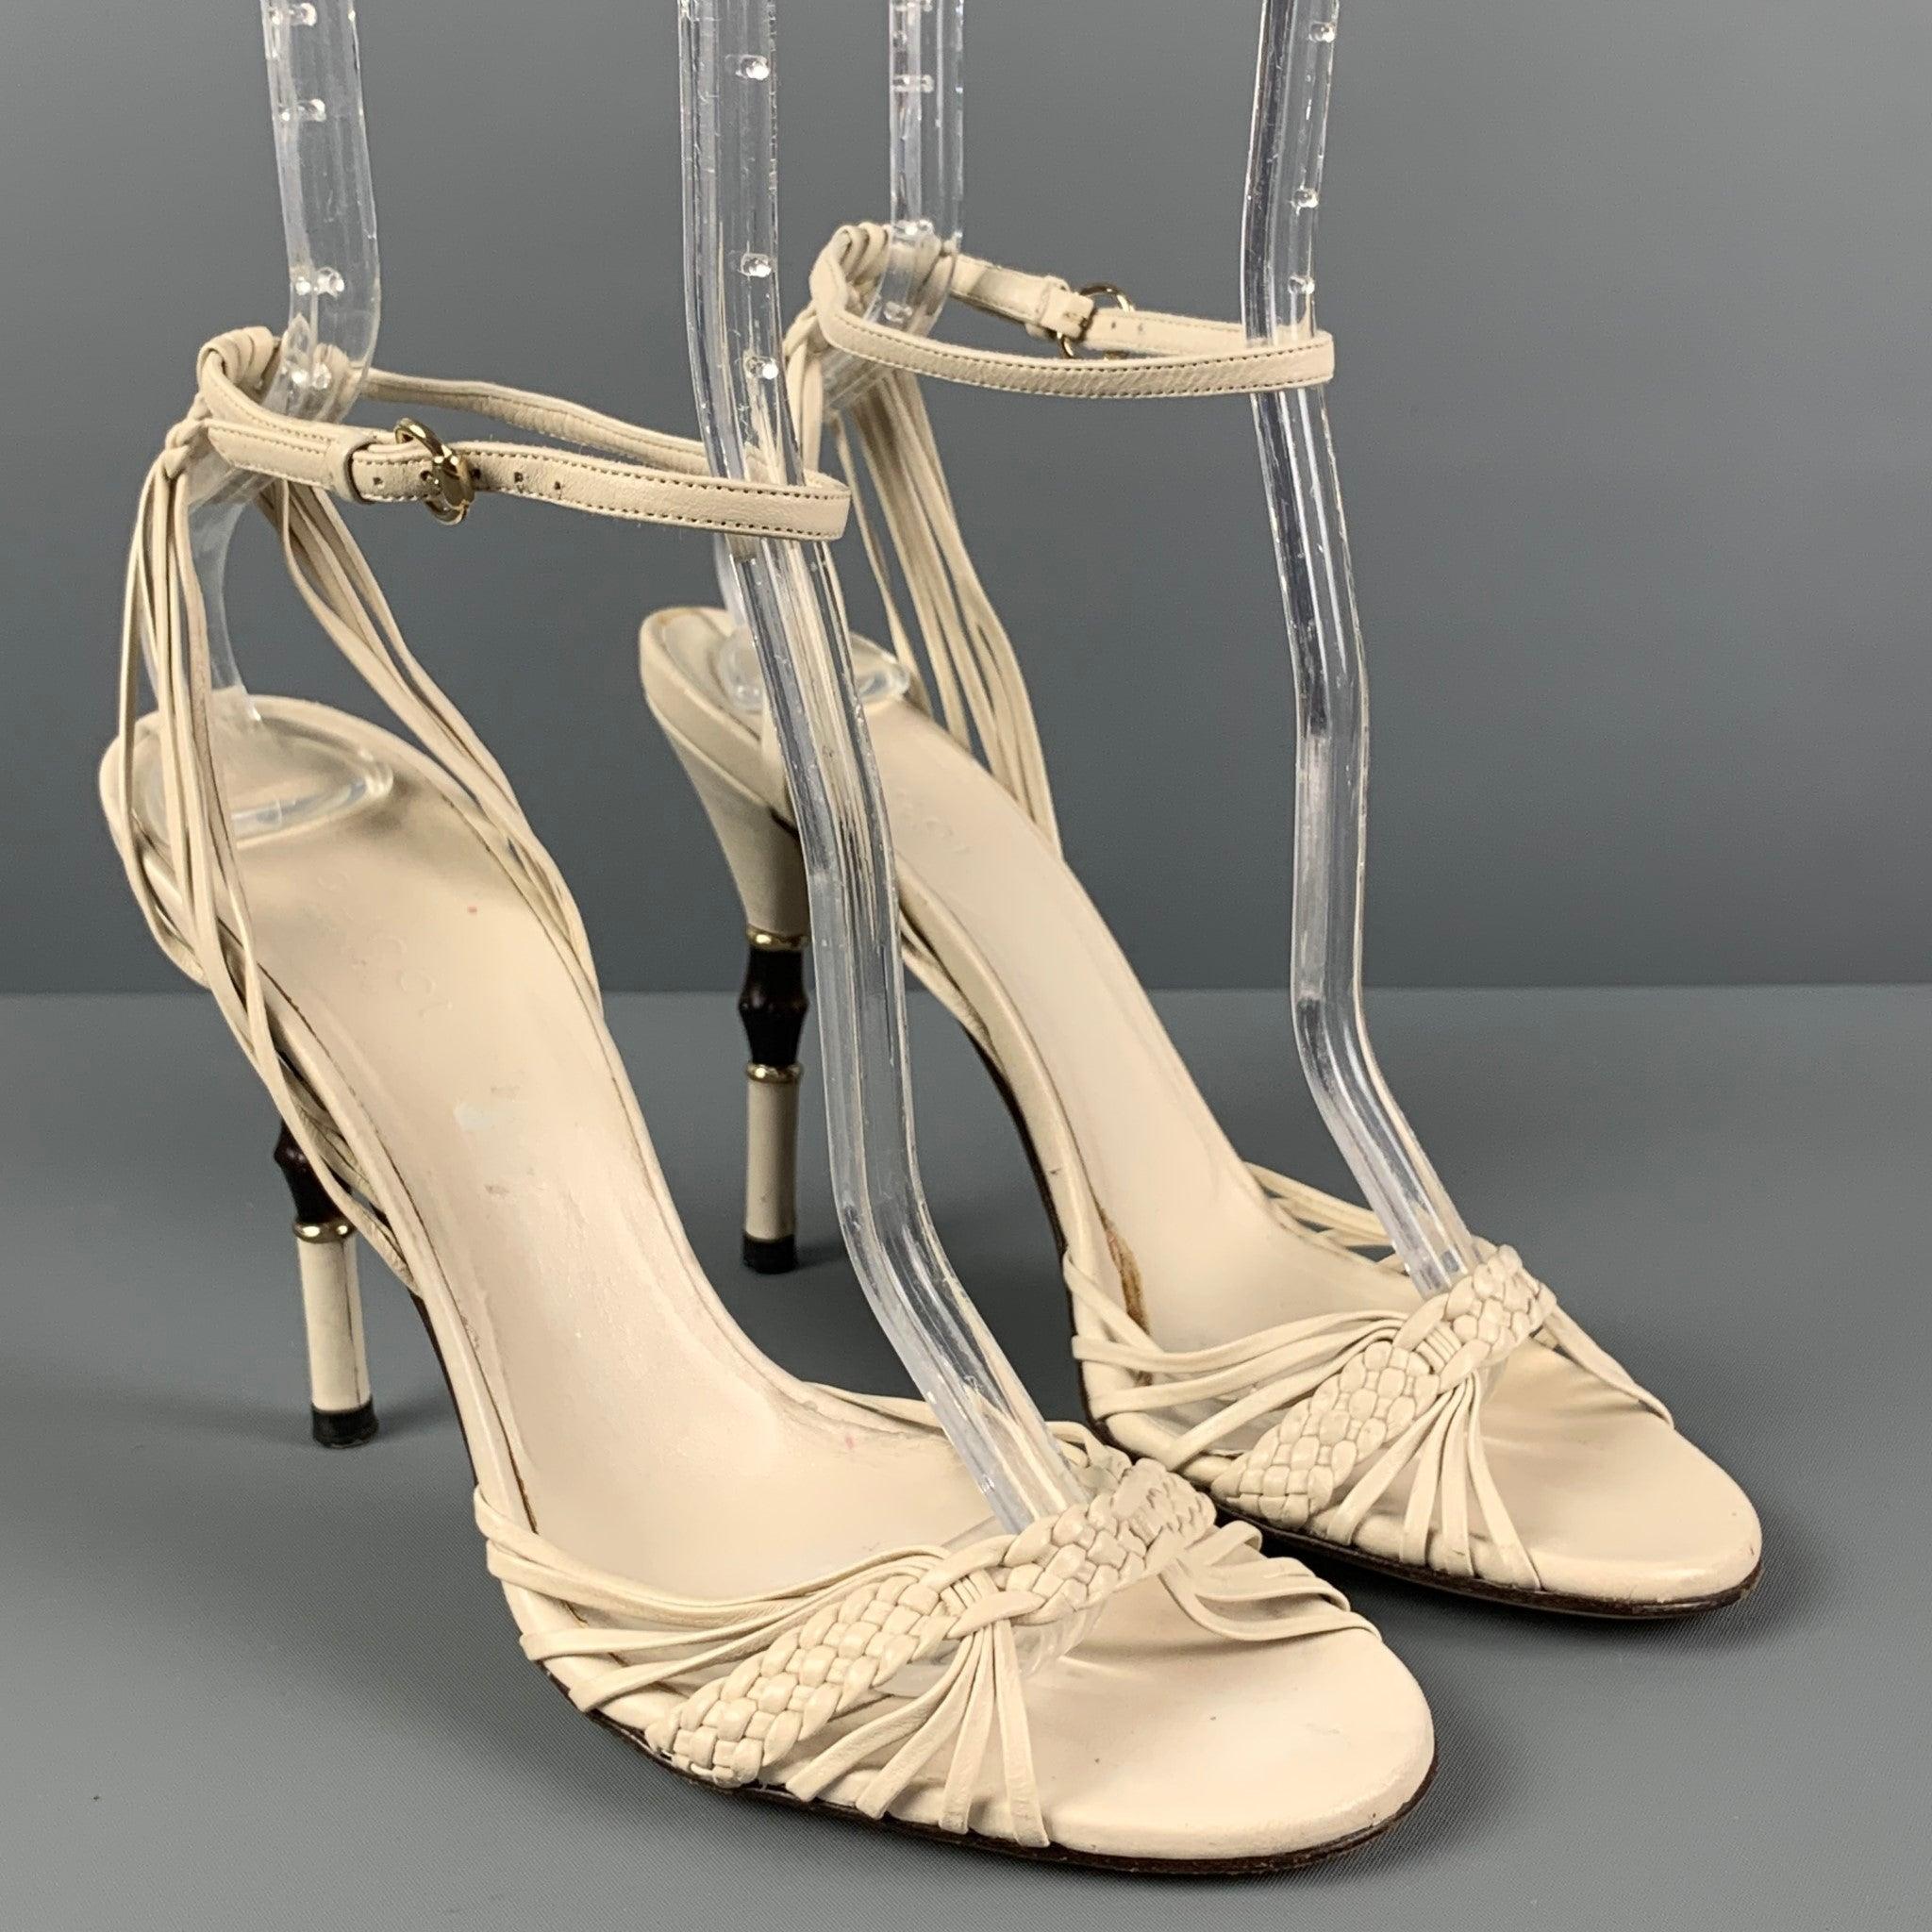 GUCCI sandals comes in a white woven leather featuring a ankle strap, open toe, and a bamboo heel. Made in Italy.
 Good
 Pre-Owned Condition. Moderate wear throughout. As-Is.  
 

 Marked:  6.5 B  
 

 Measurements: 
  Heel:
 4 inches  
  
  
  
